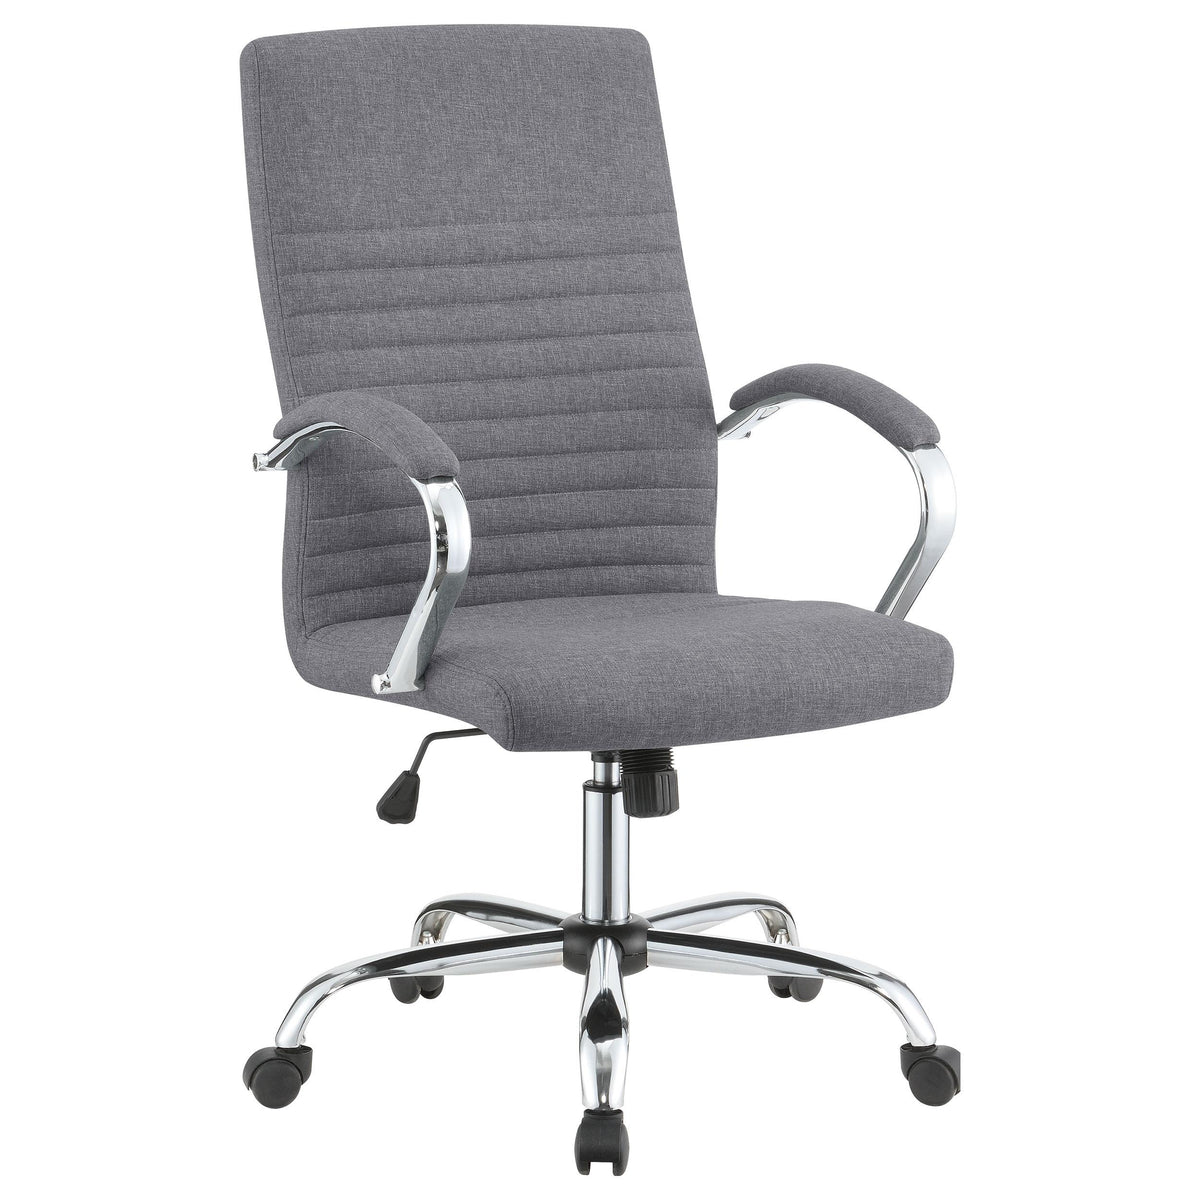 Abisko Upholstered Office Chair with Casters Grey and Chrome  Las Vegas Furniture Stores